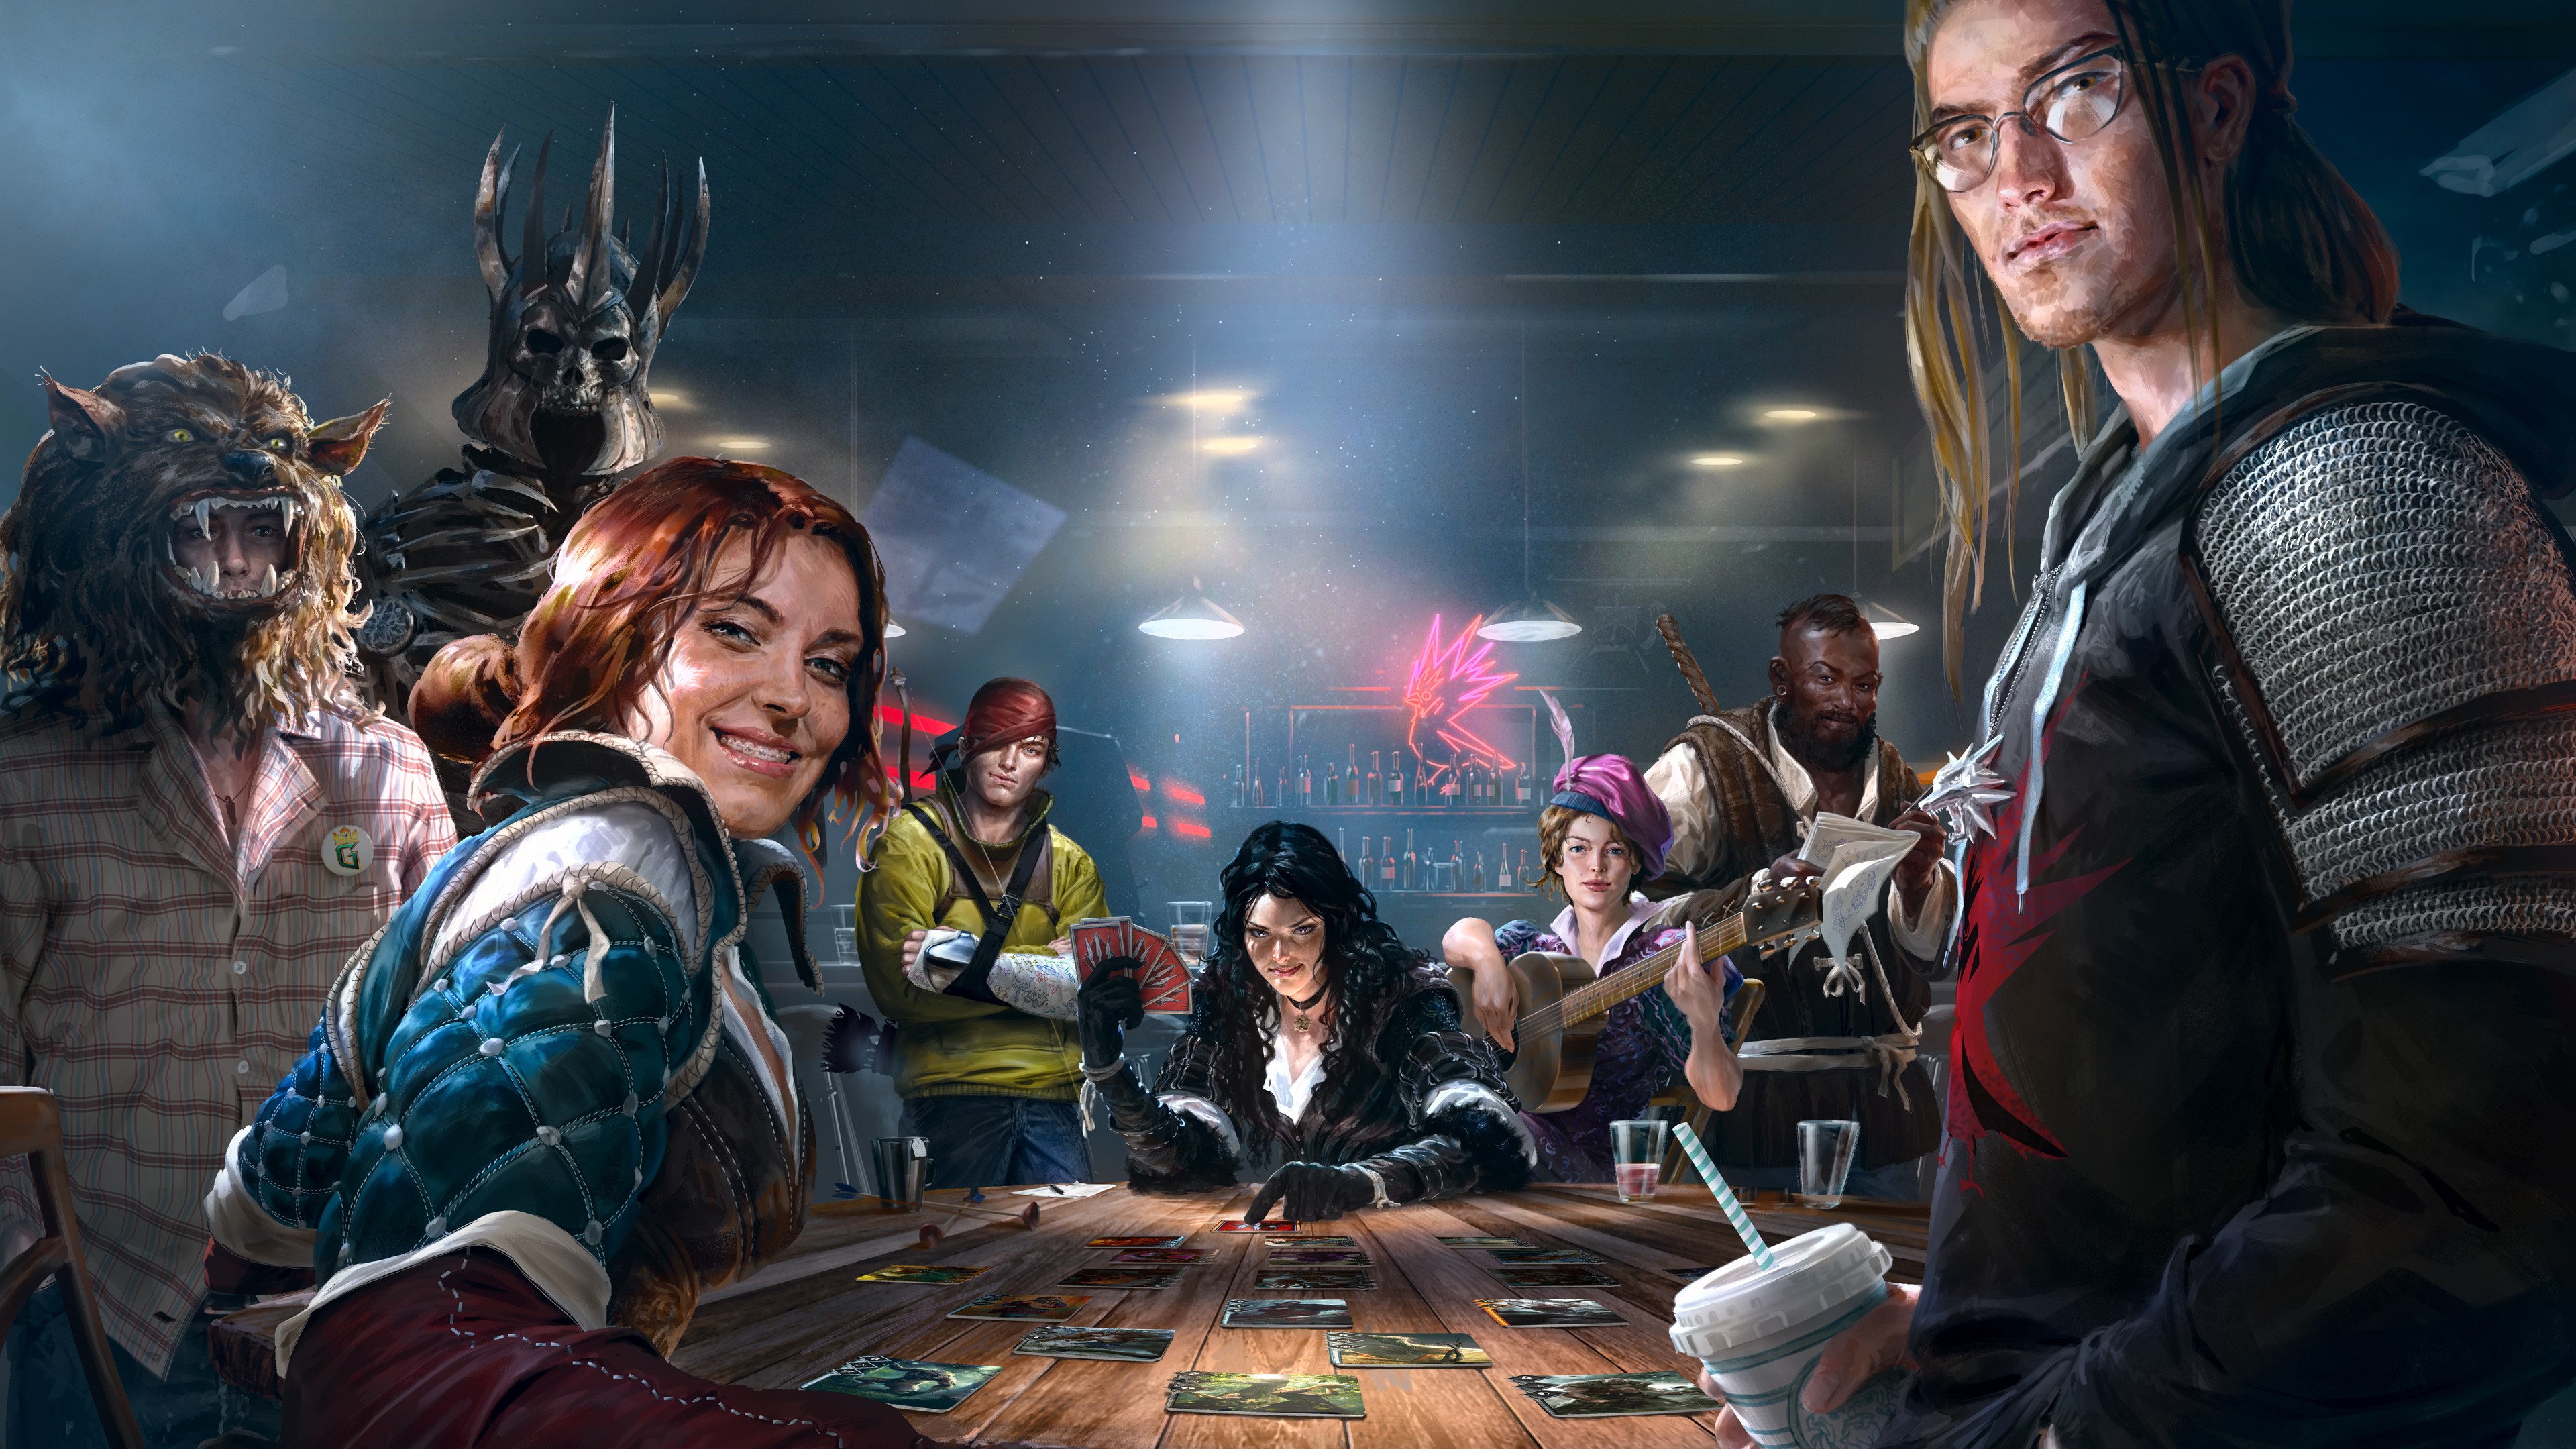 The Witcher, Trading Card Games, Gwent, The Witcher 3: Wild Hunt Wallpaper